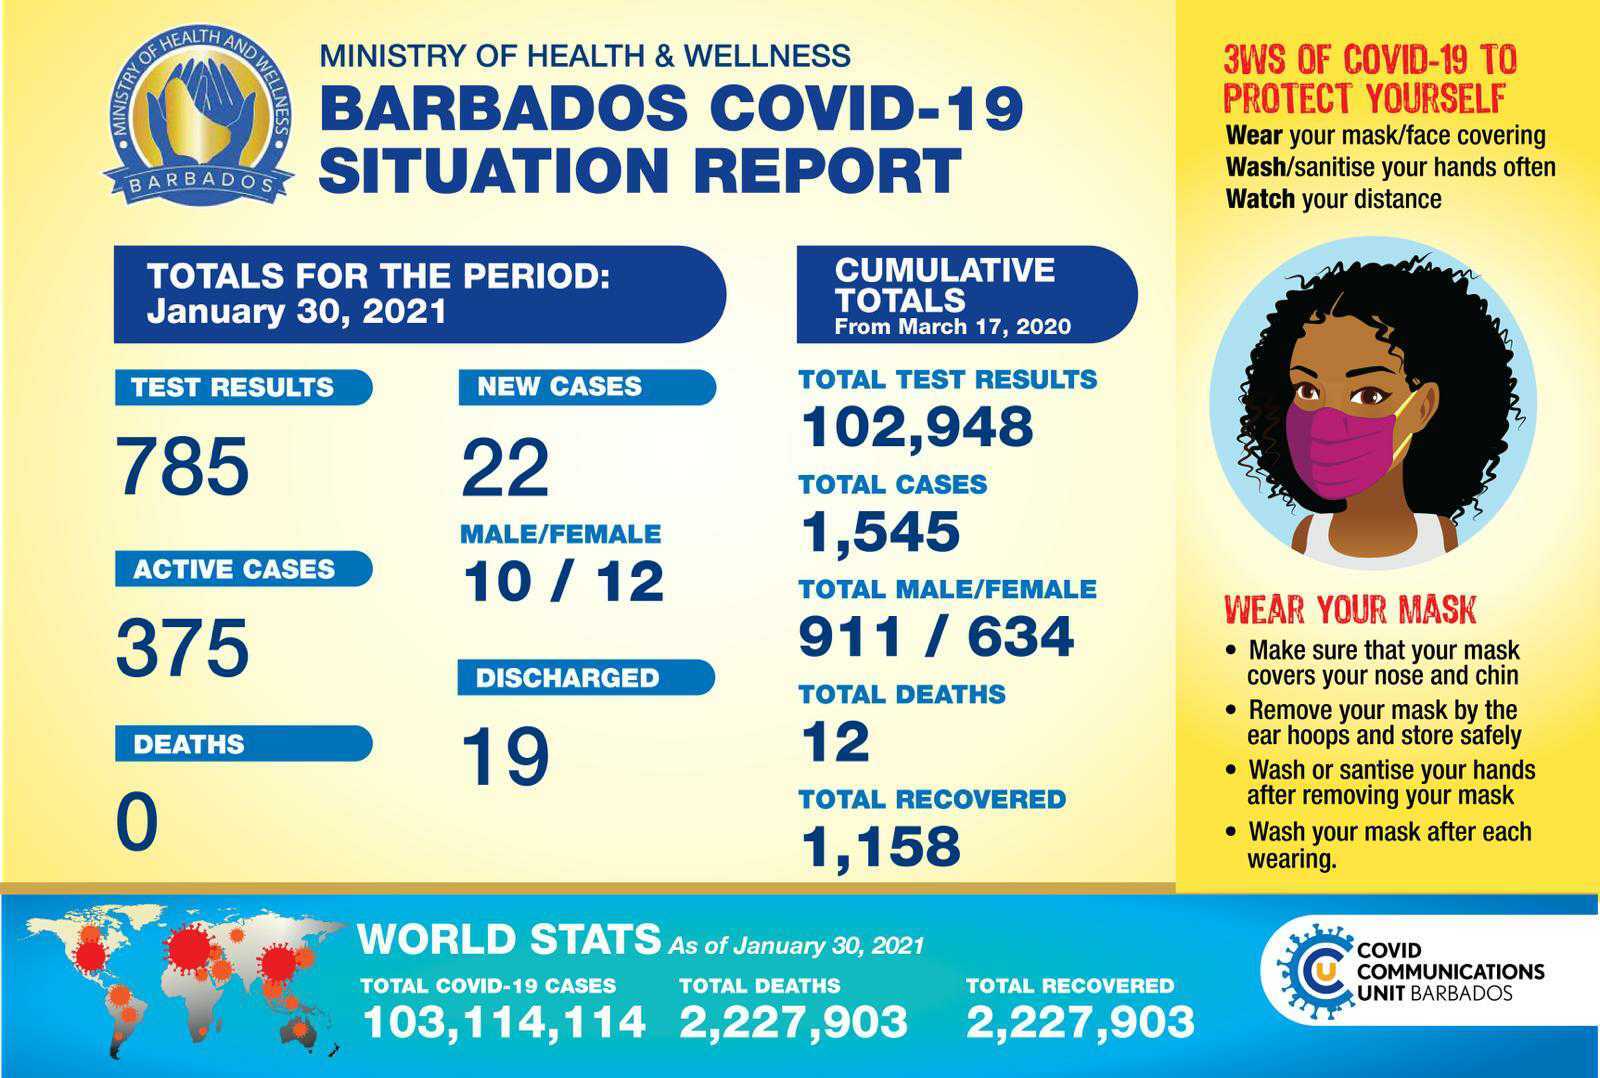  COVID-19 Update: Barbados has 375 active cases of COVID-19